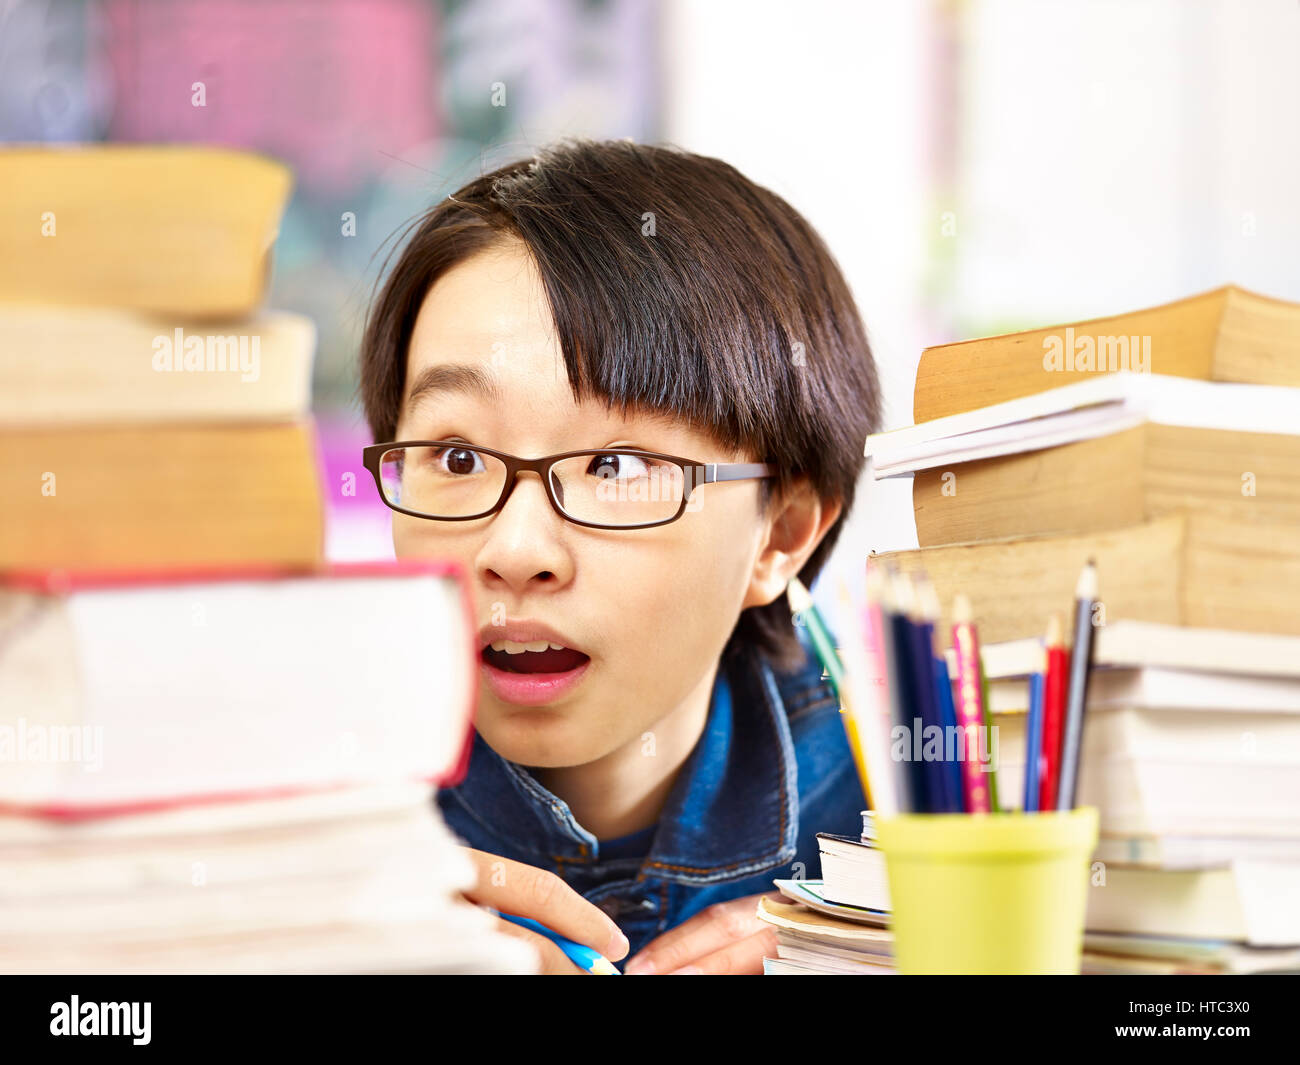 asian pupil wearing glasses appears to be shocked by the books he has to read. Stock Photo